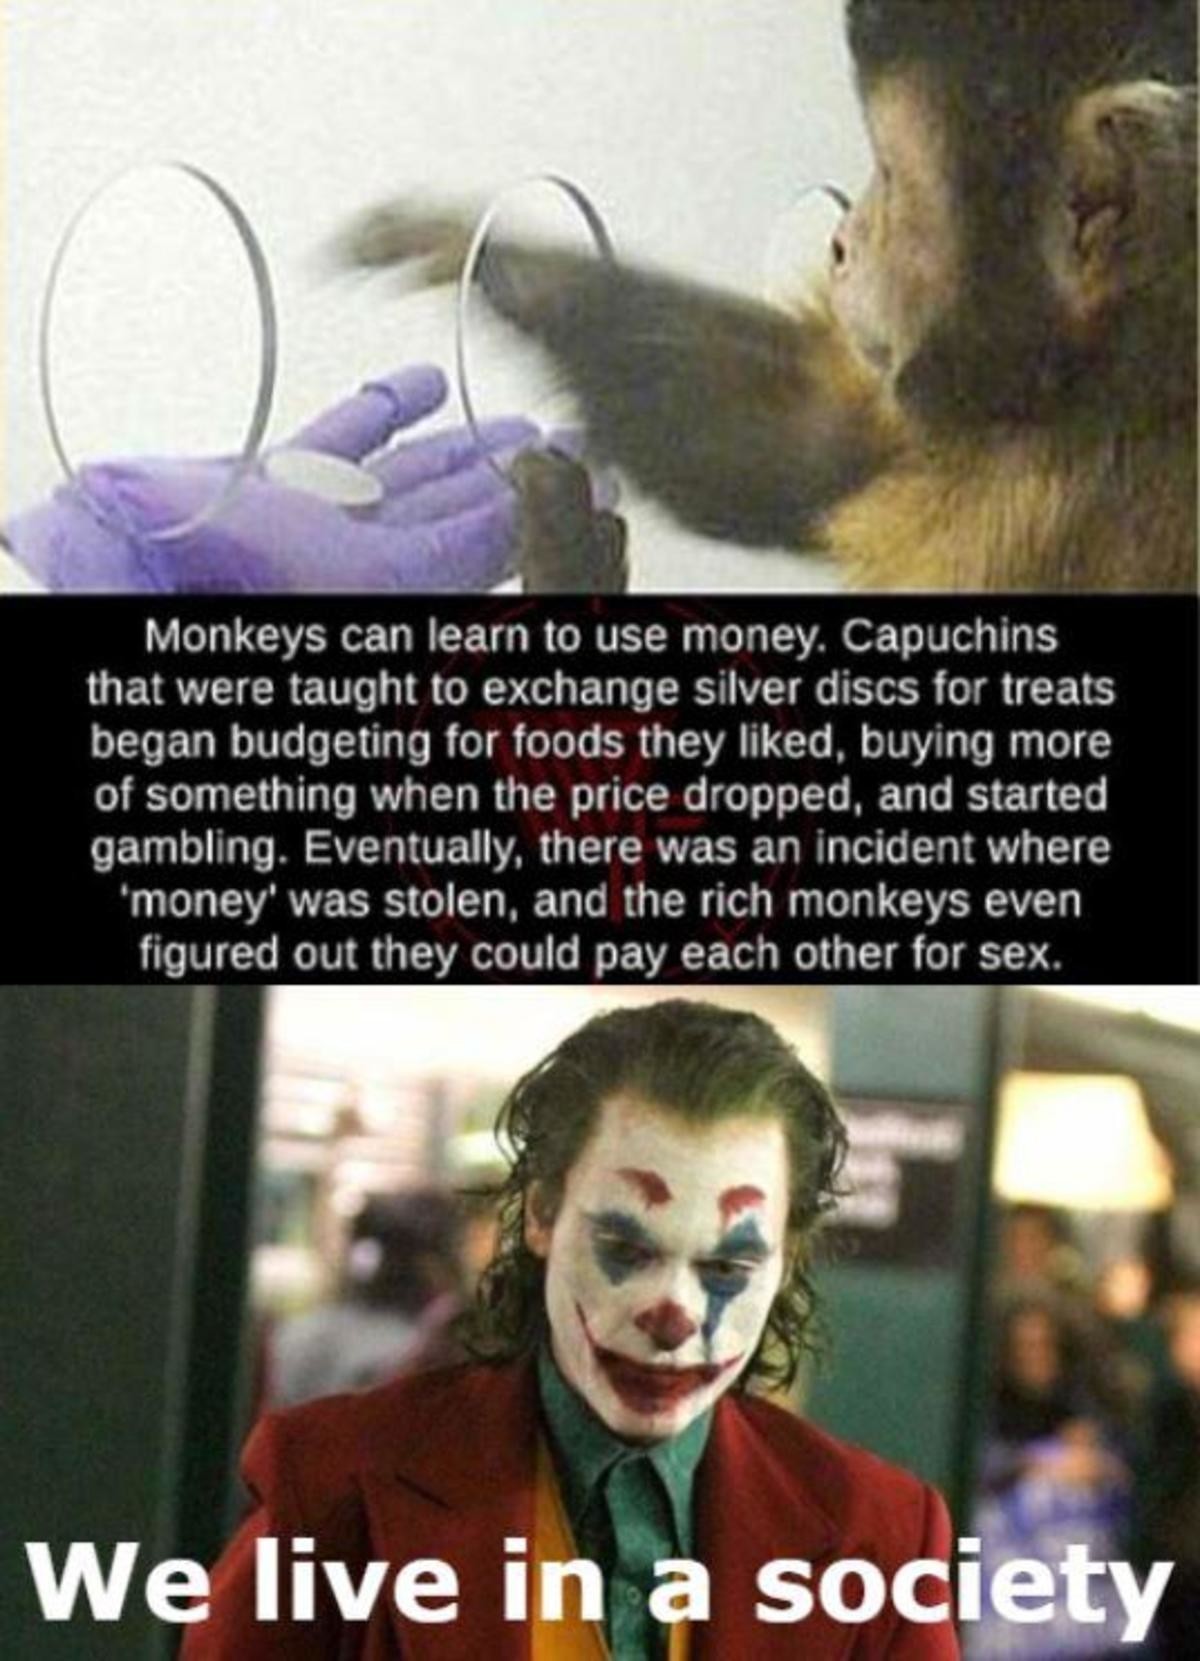 https://funnyjunk.com/Just+like+us/gXffMtK/. .. And then a chimp came in and pulled everyones faces off because grapes are for pussies.